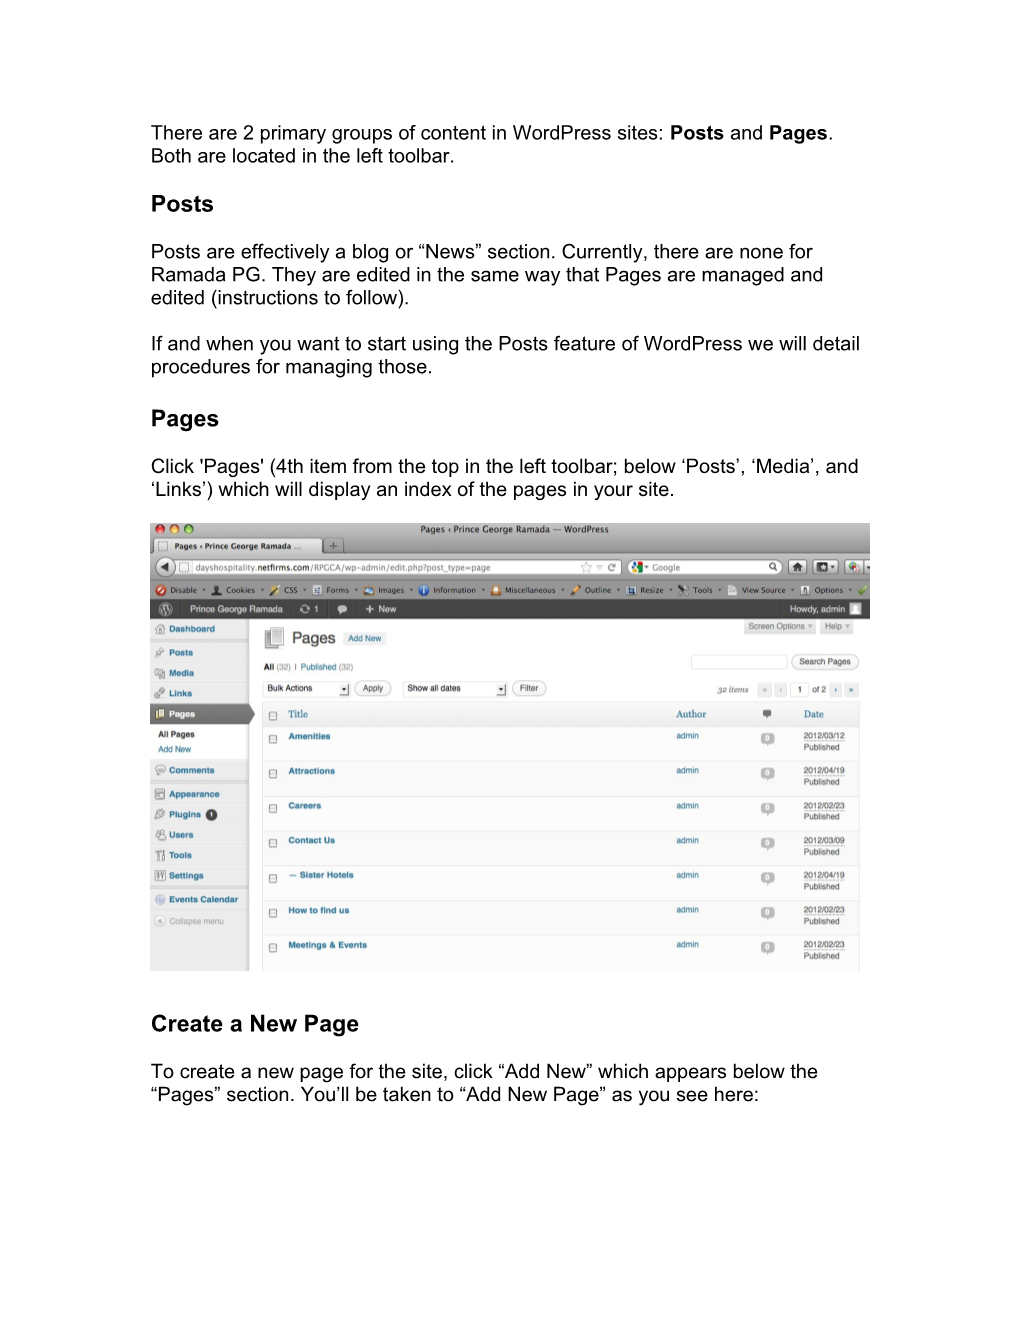 There Are 2 Primary Groups of Content in Wordpress Sites: Posts and Pages. Both Are Located